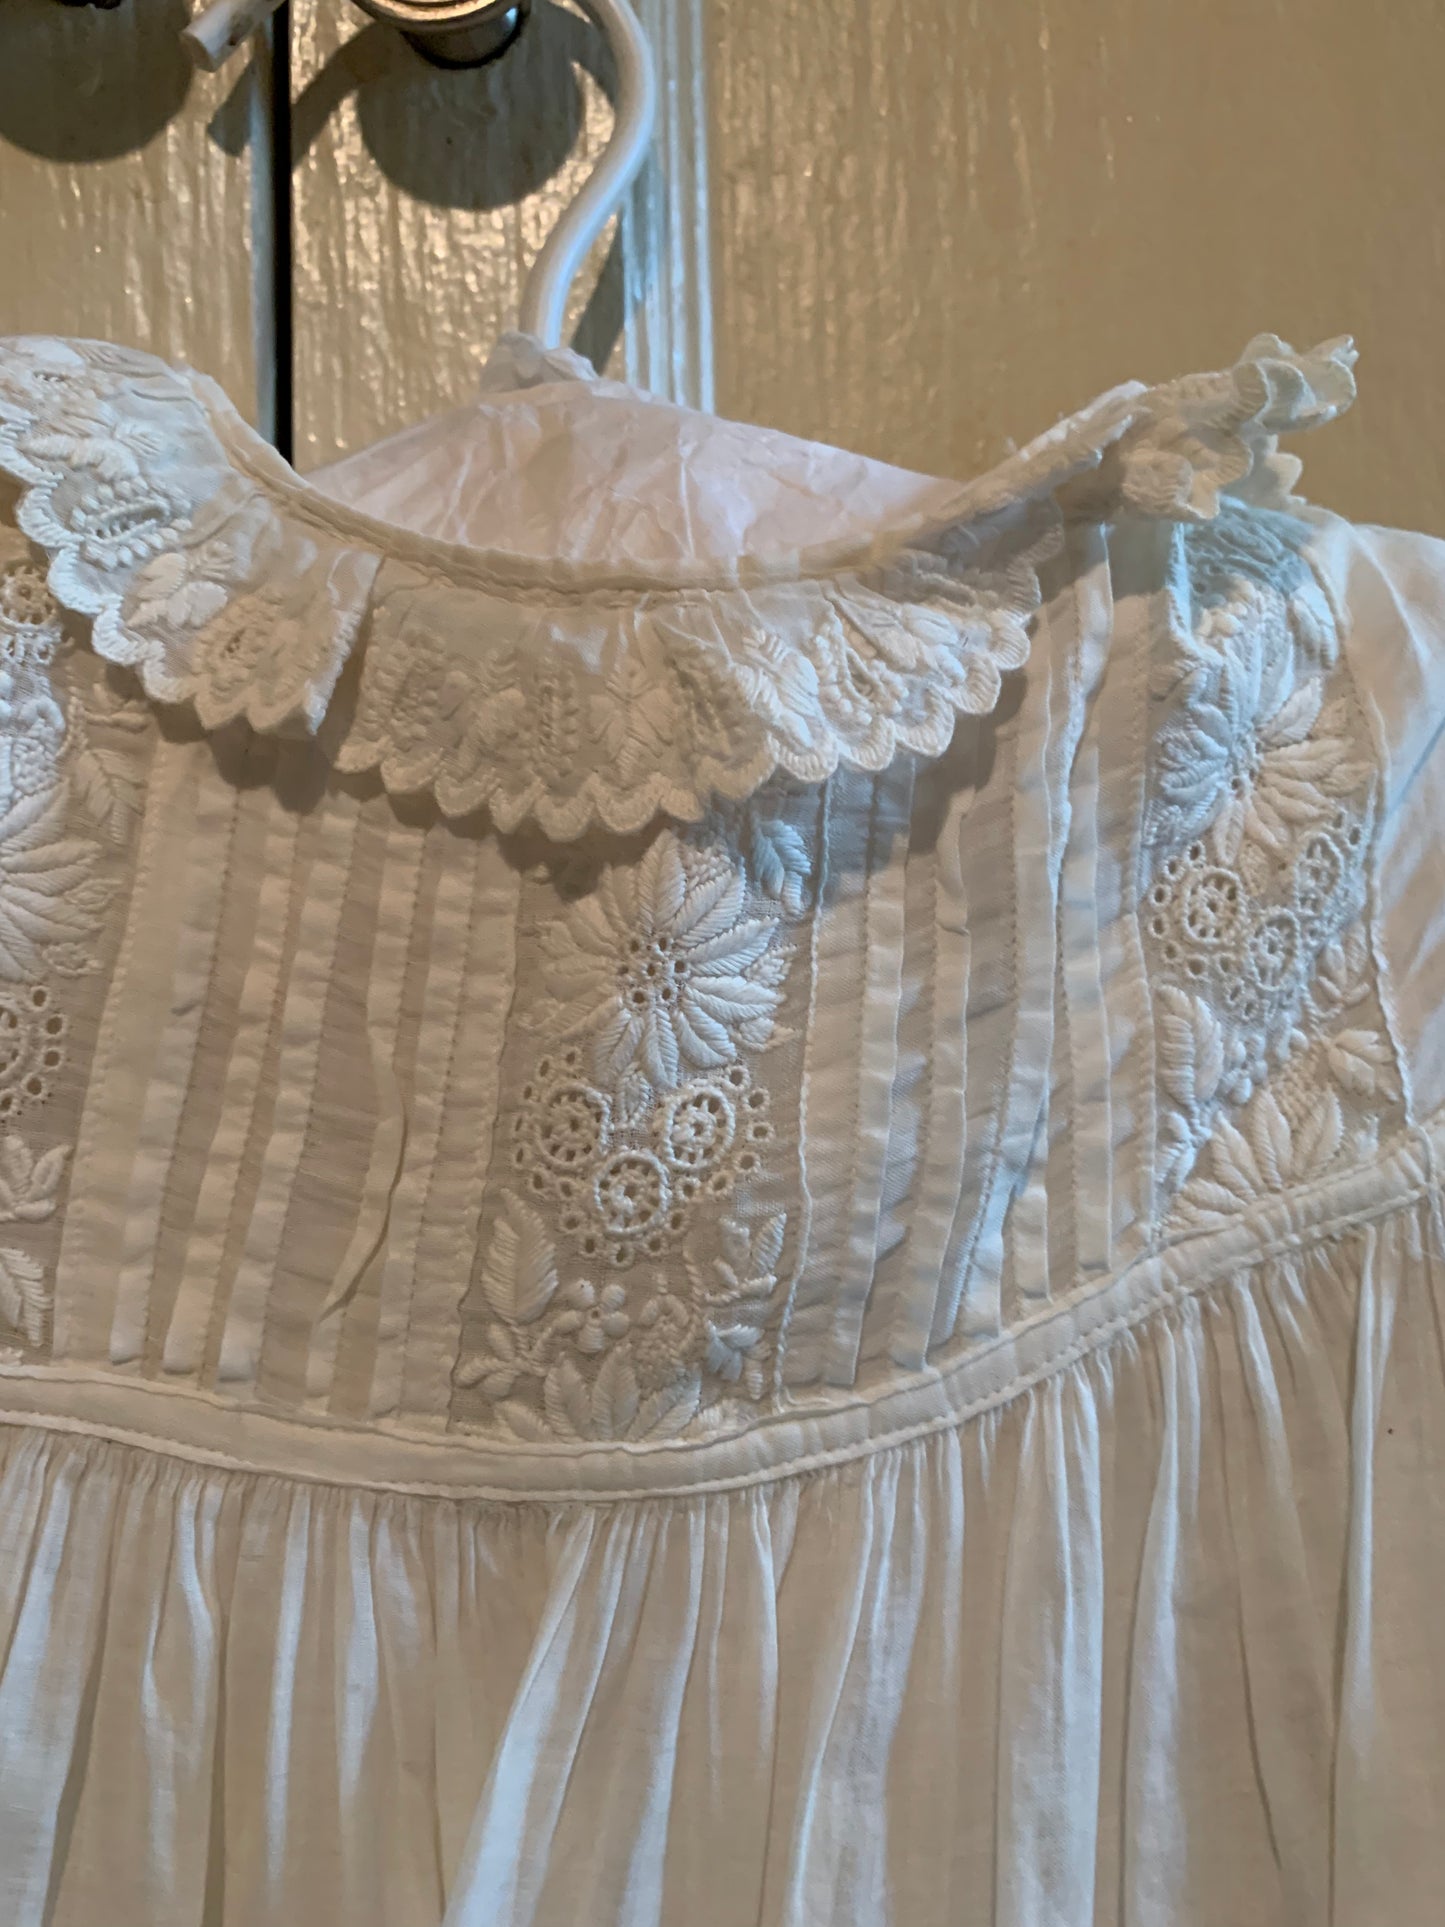 Exquisite Pleated and Embroidered Cotton Christening Gown with Slip circa 1900s